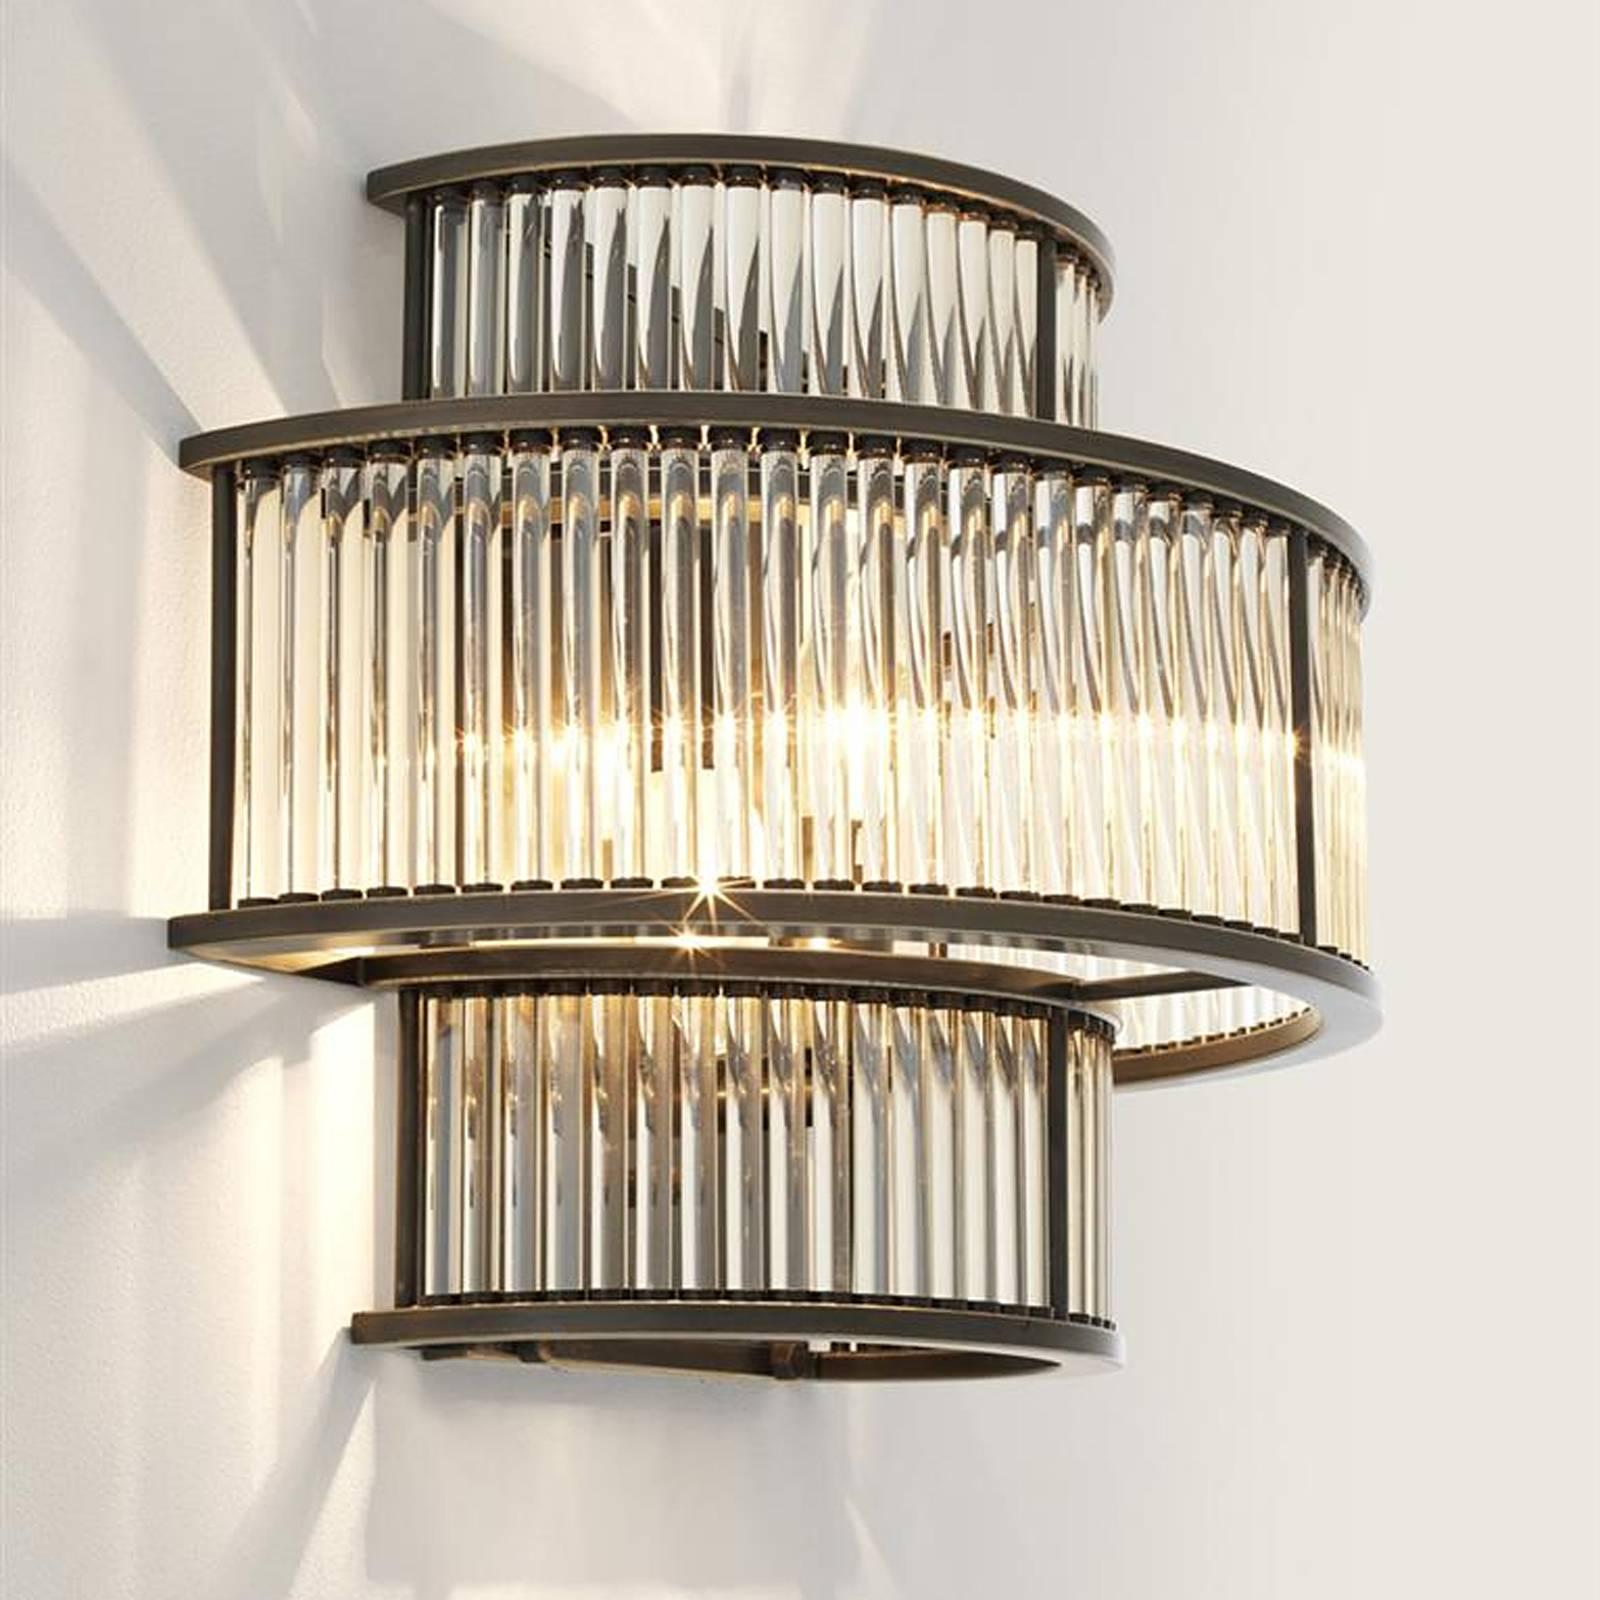 Chinese Glass Stairs Wall Lamp in Bronze Highlight Finish or in Nickel Finish